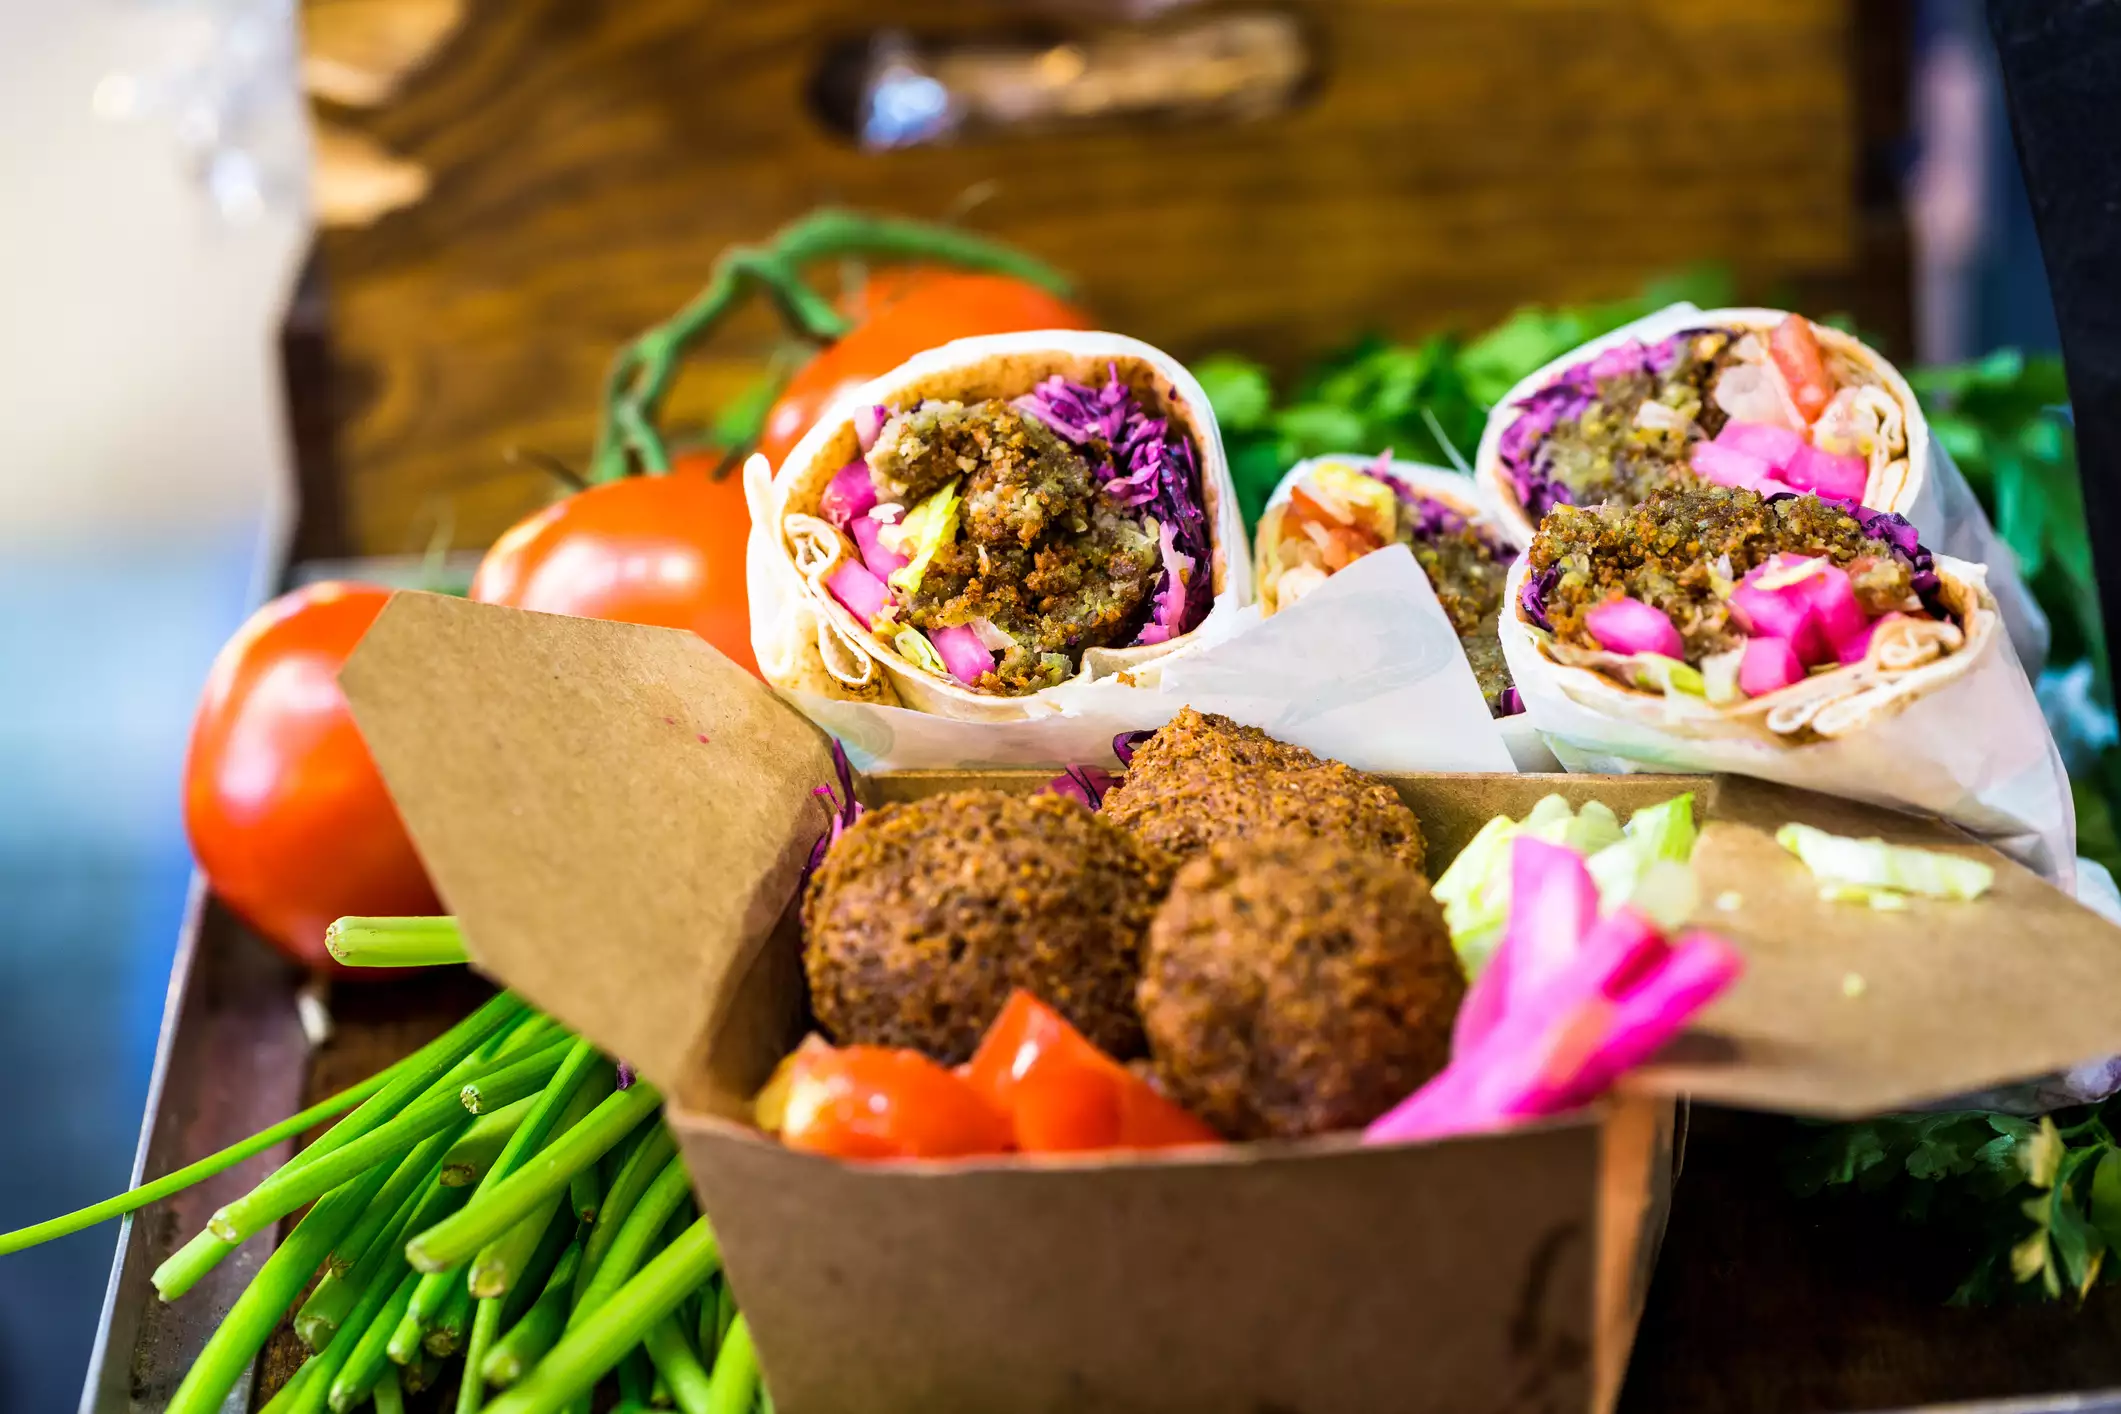 Close up image of boxes of vegetarian food for sale on a market stall at Borough Market, a famous food market in central London, UK. In the foreground a brown cardboard box is attractively filled with falafel balls, red cabbage and tomato, beyond this are wraps filled with falafel, tomato and red cabbage.